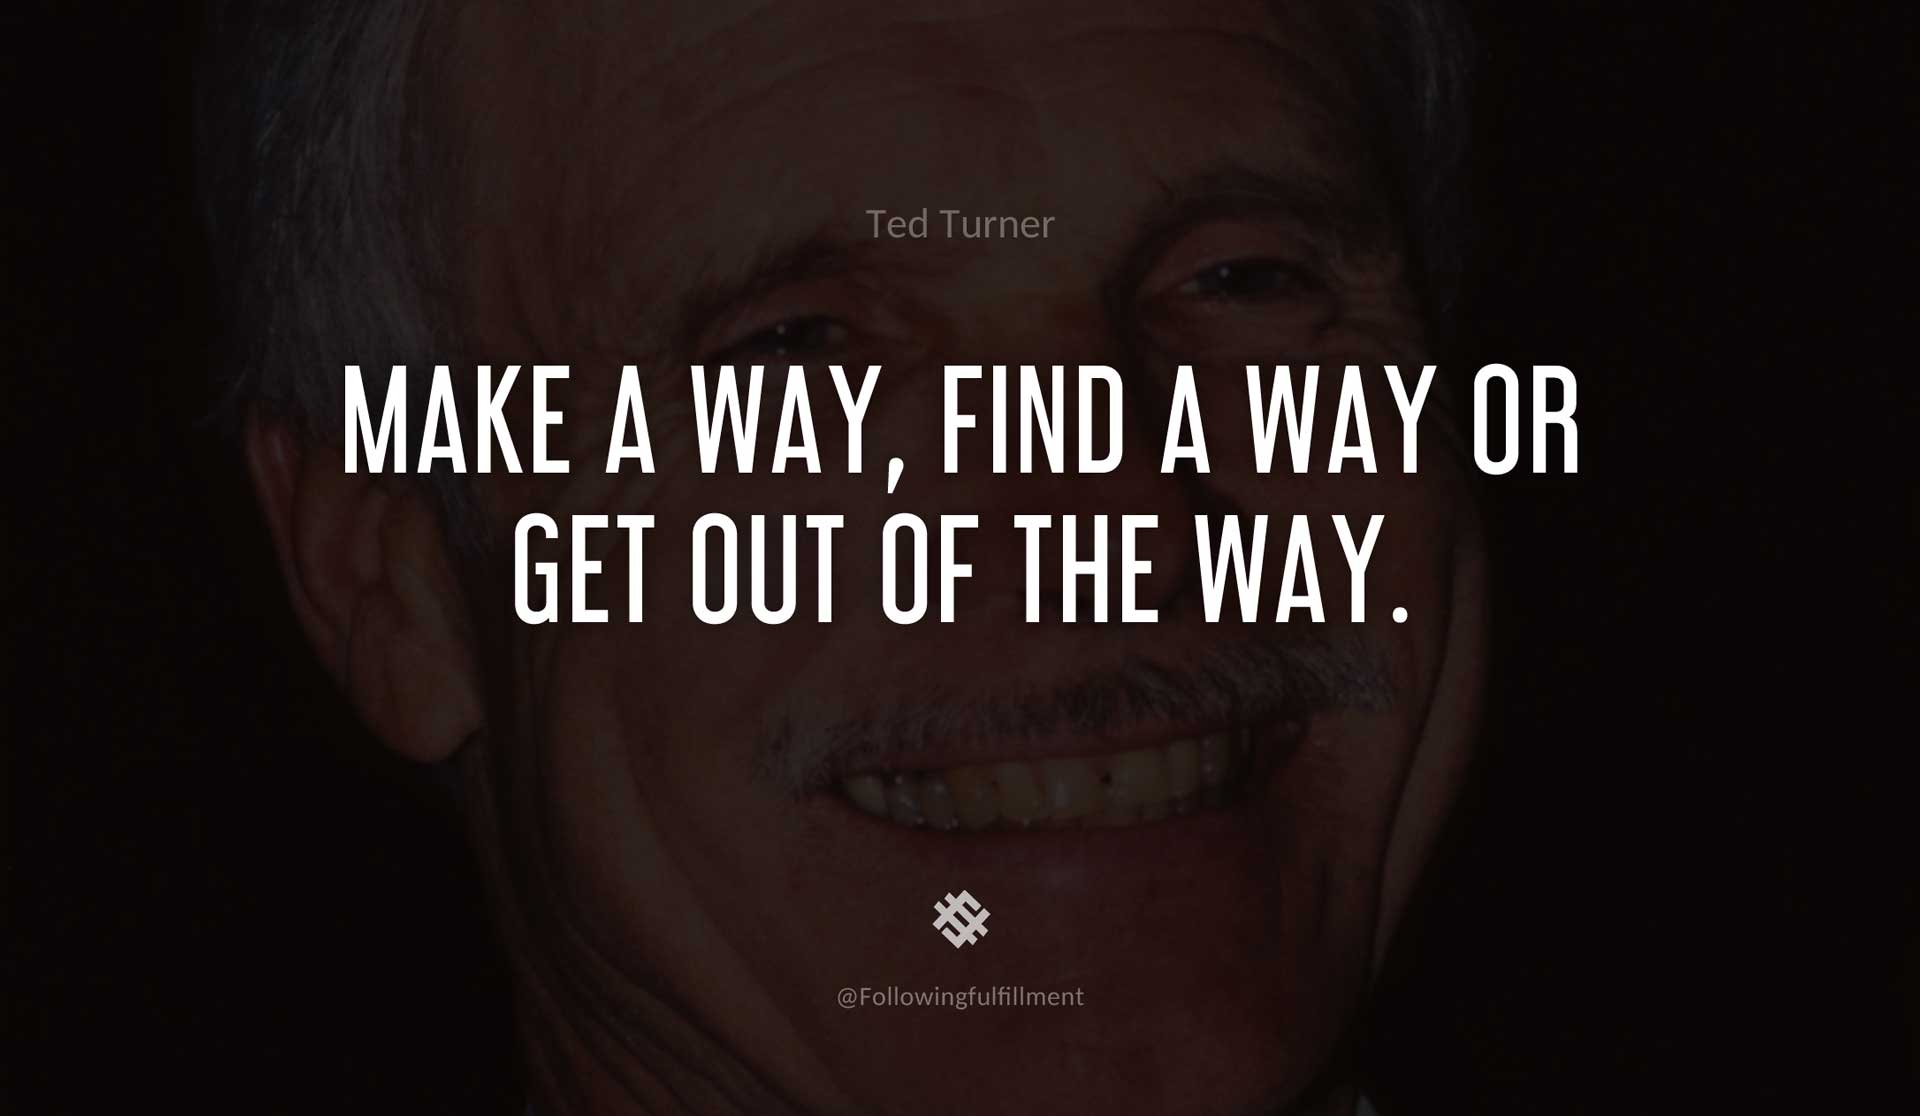 Make-a-way,-find-a-way-or-get-out-of-the-way.-TED-TURNER-Quote.jpg